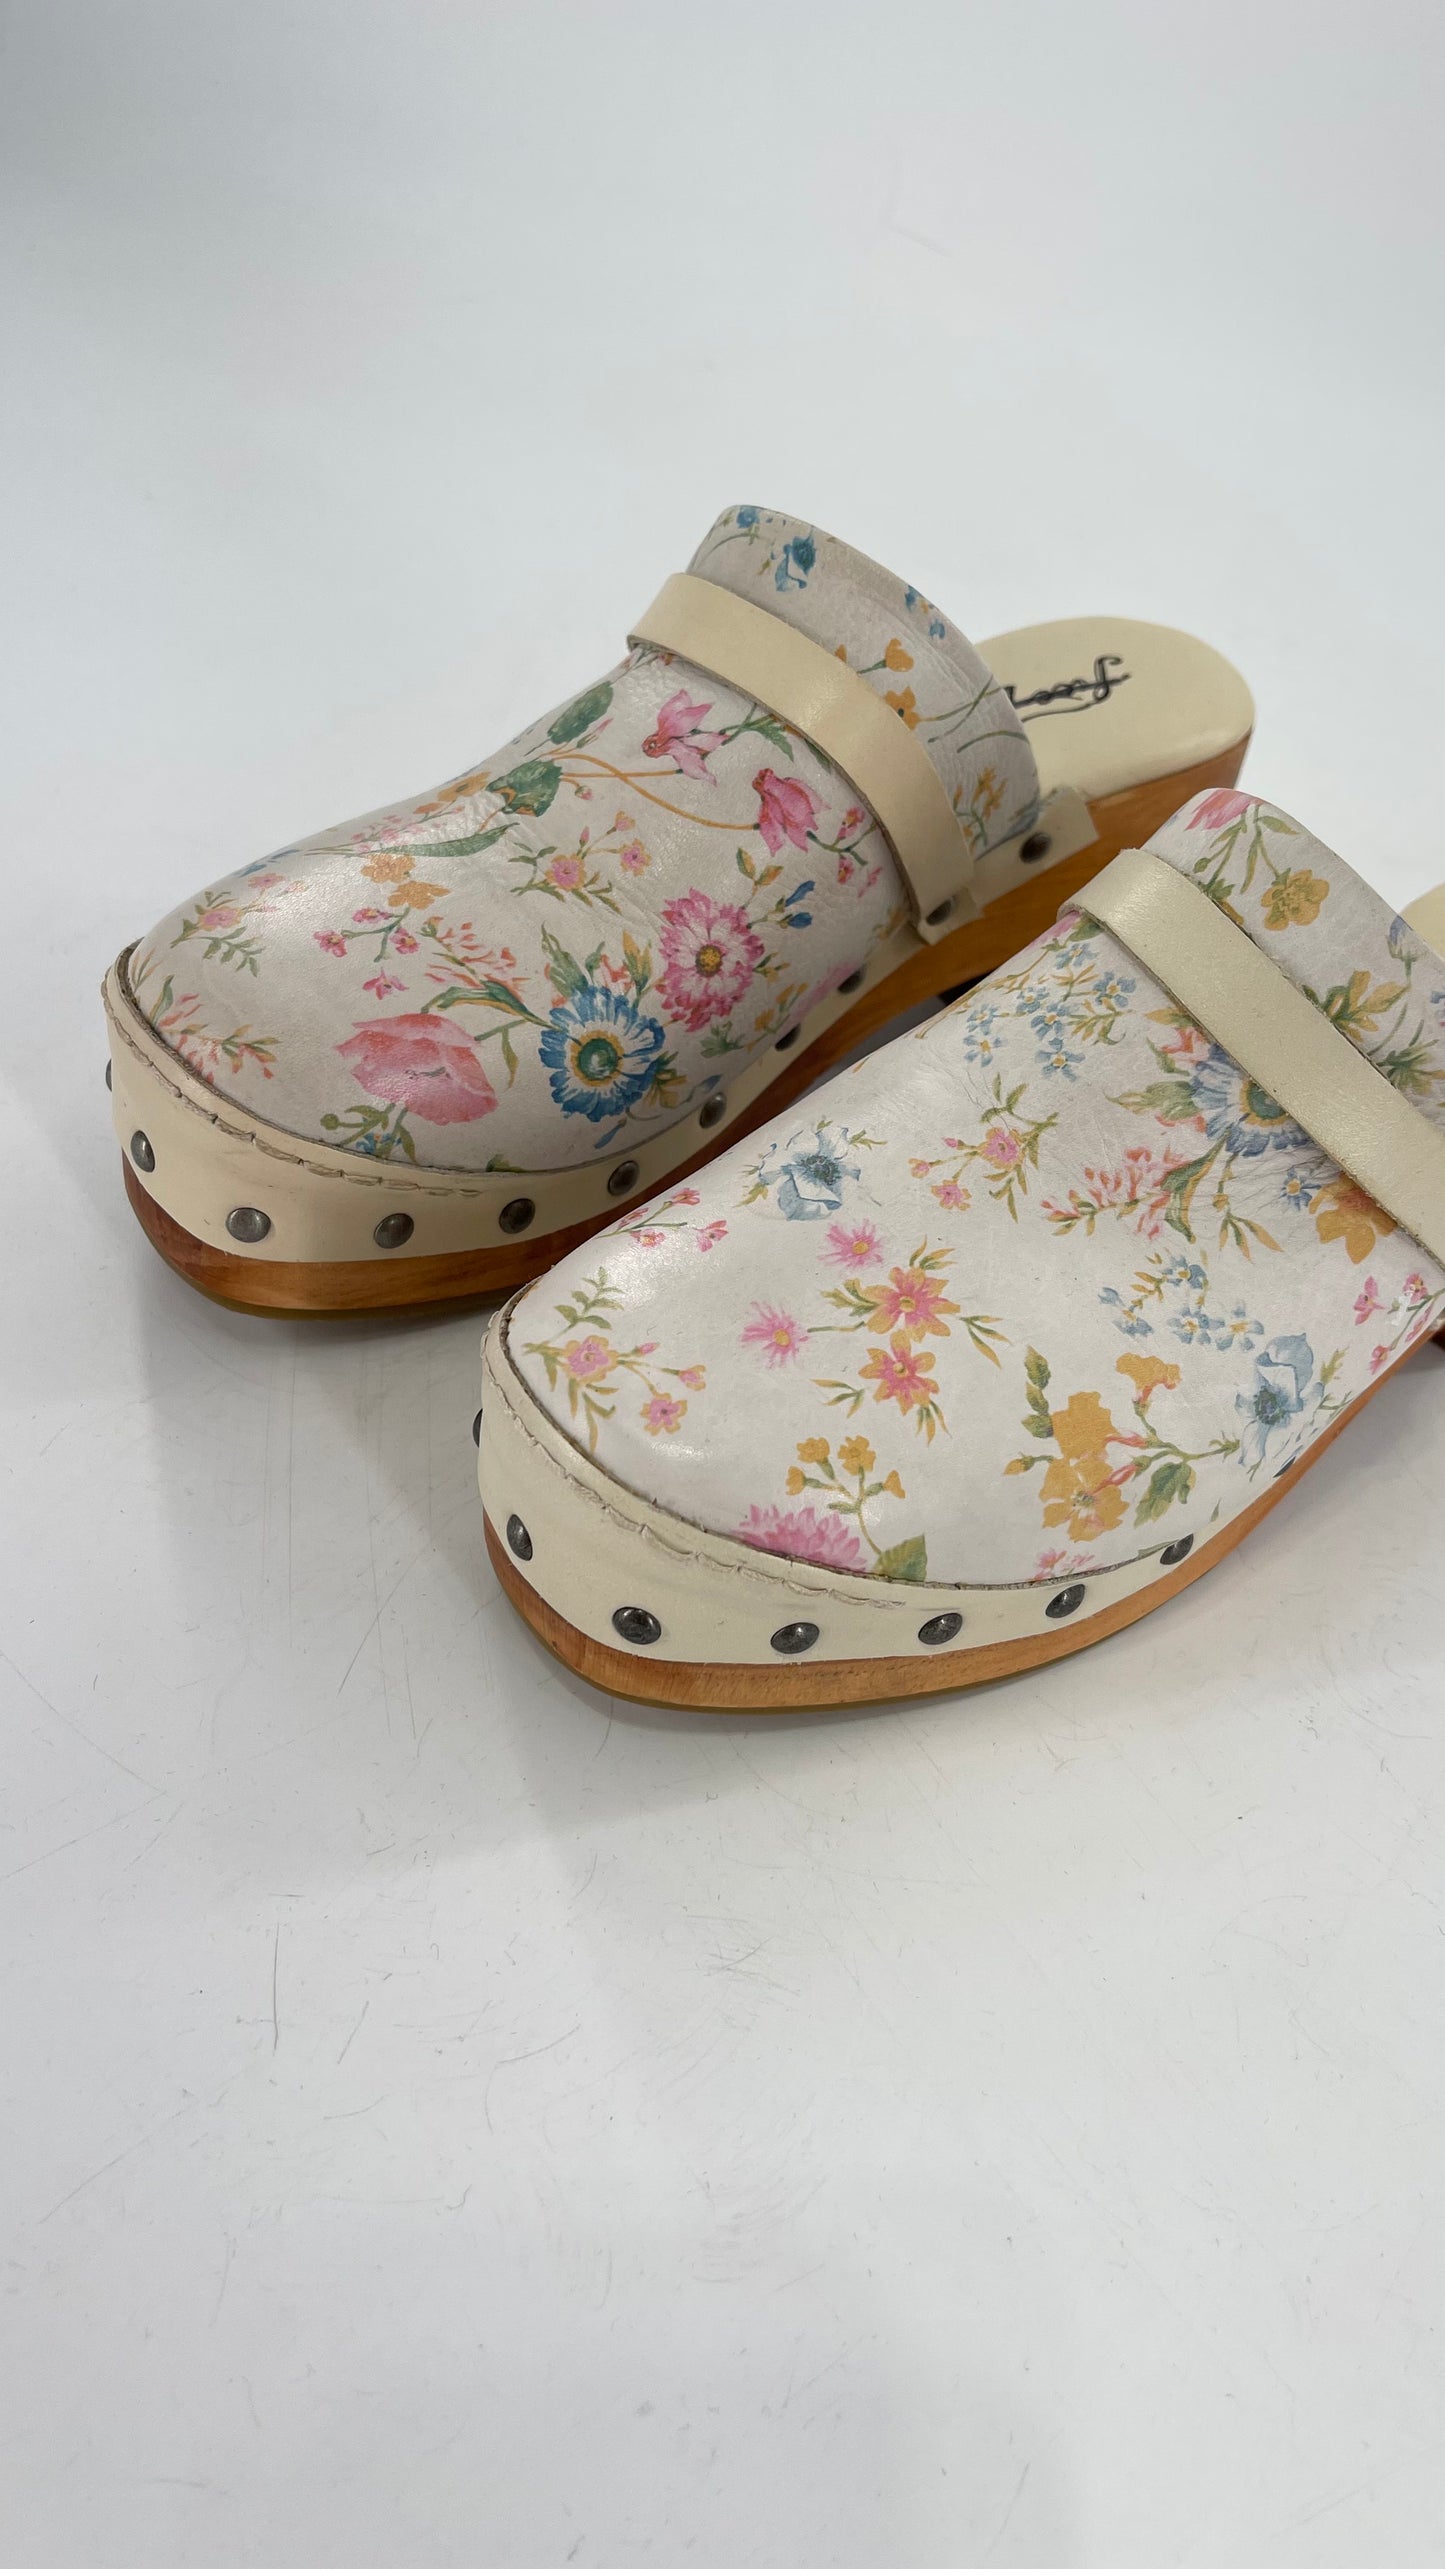 Free People Calabasas Off White Clogs with Floral Design (38)